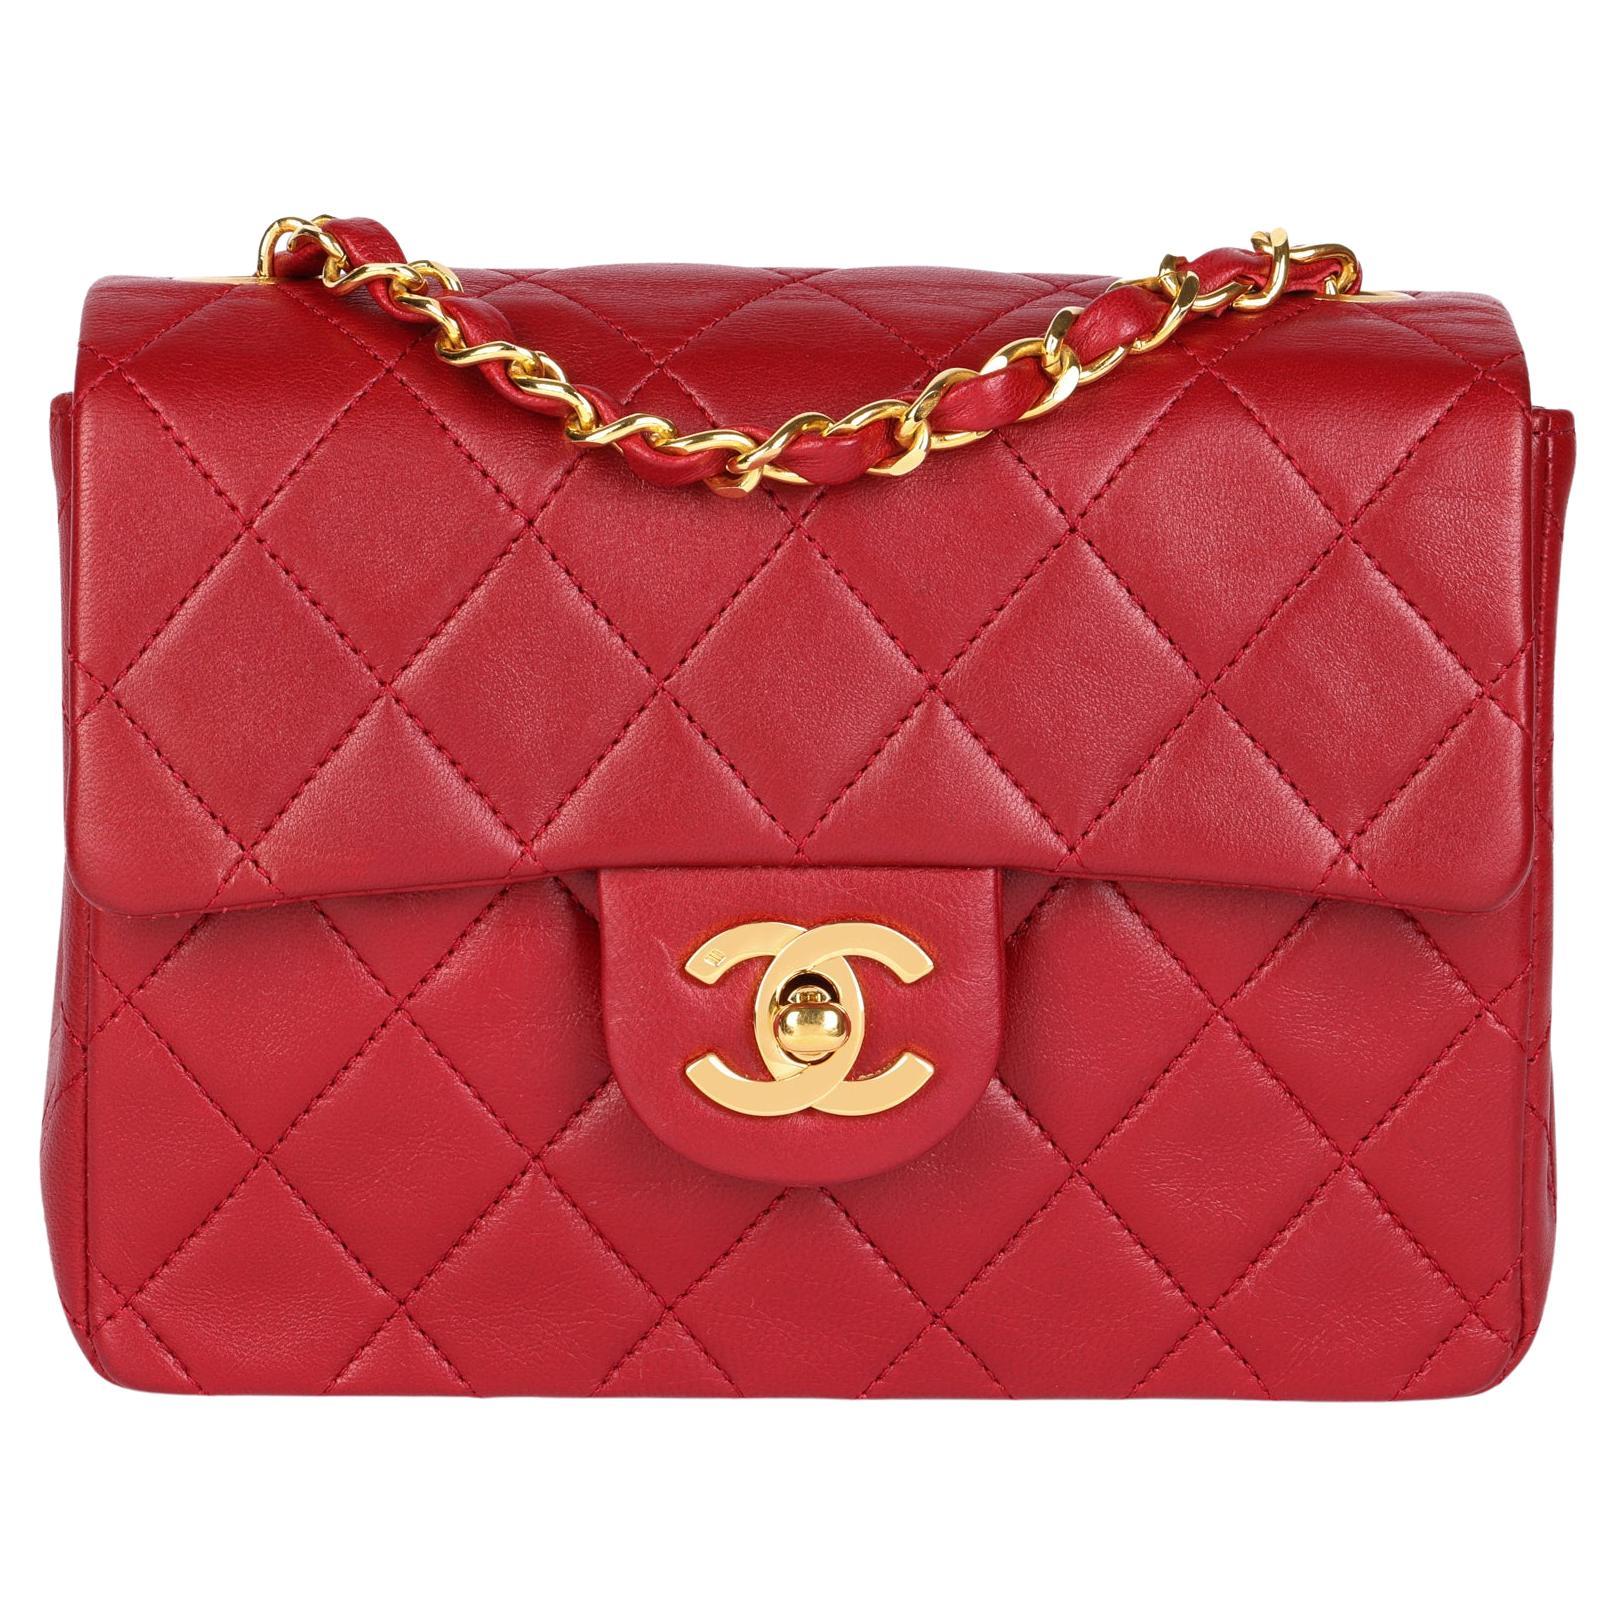 CHANEL Red Quilted Lambskin Vintage Square Mini Flap Bag at